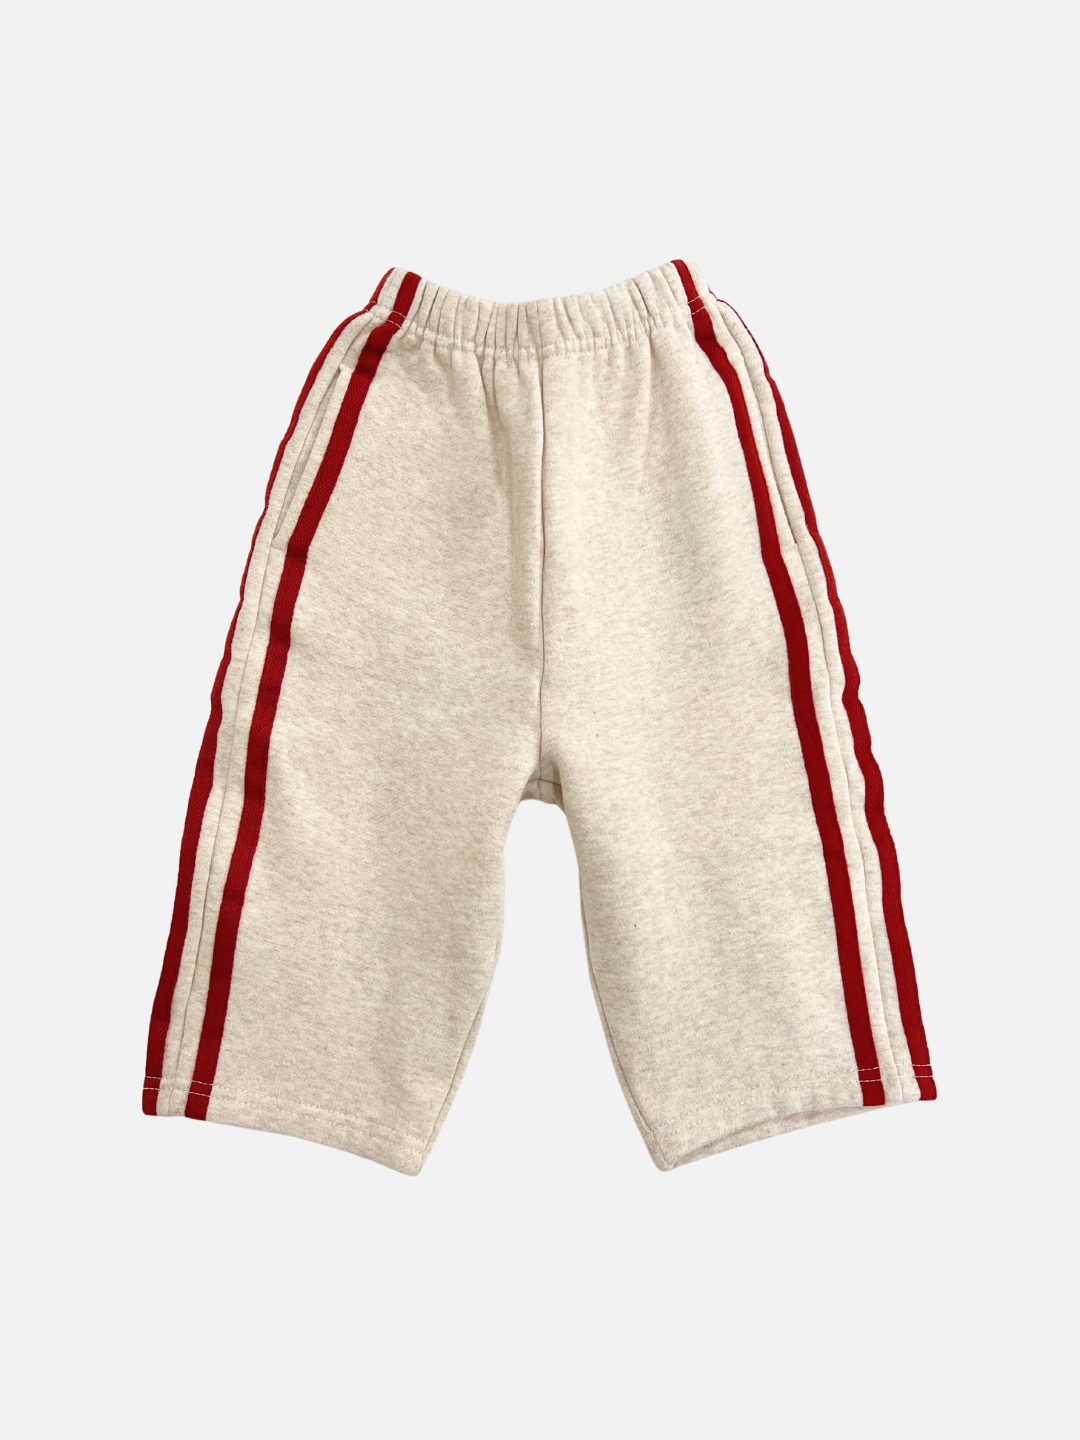 A front view of the kid's Varsity Pant in Oatmeal with red stripes on the sides.